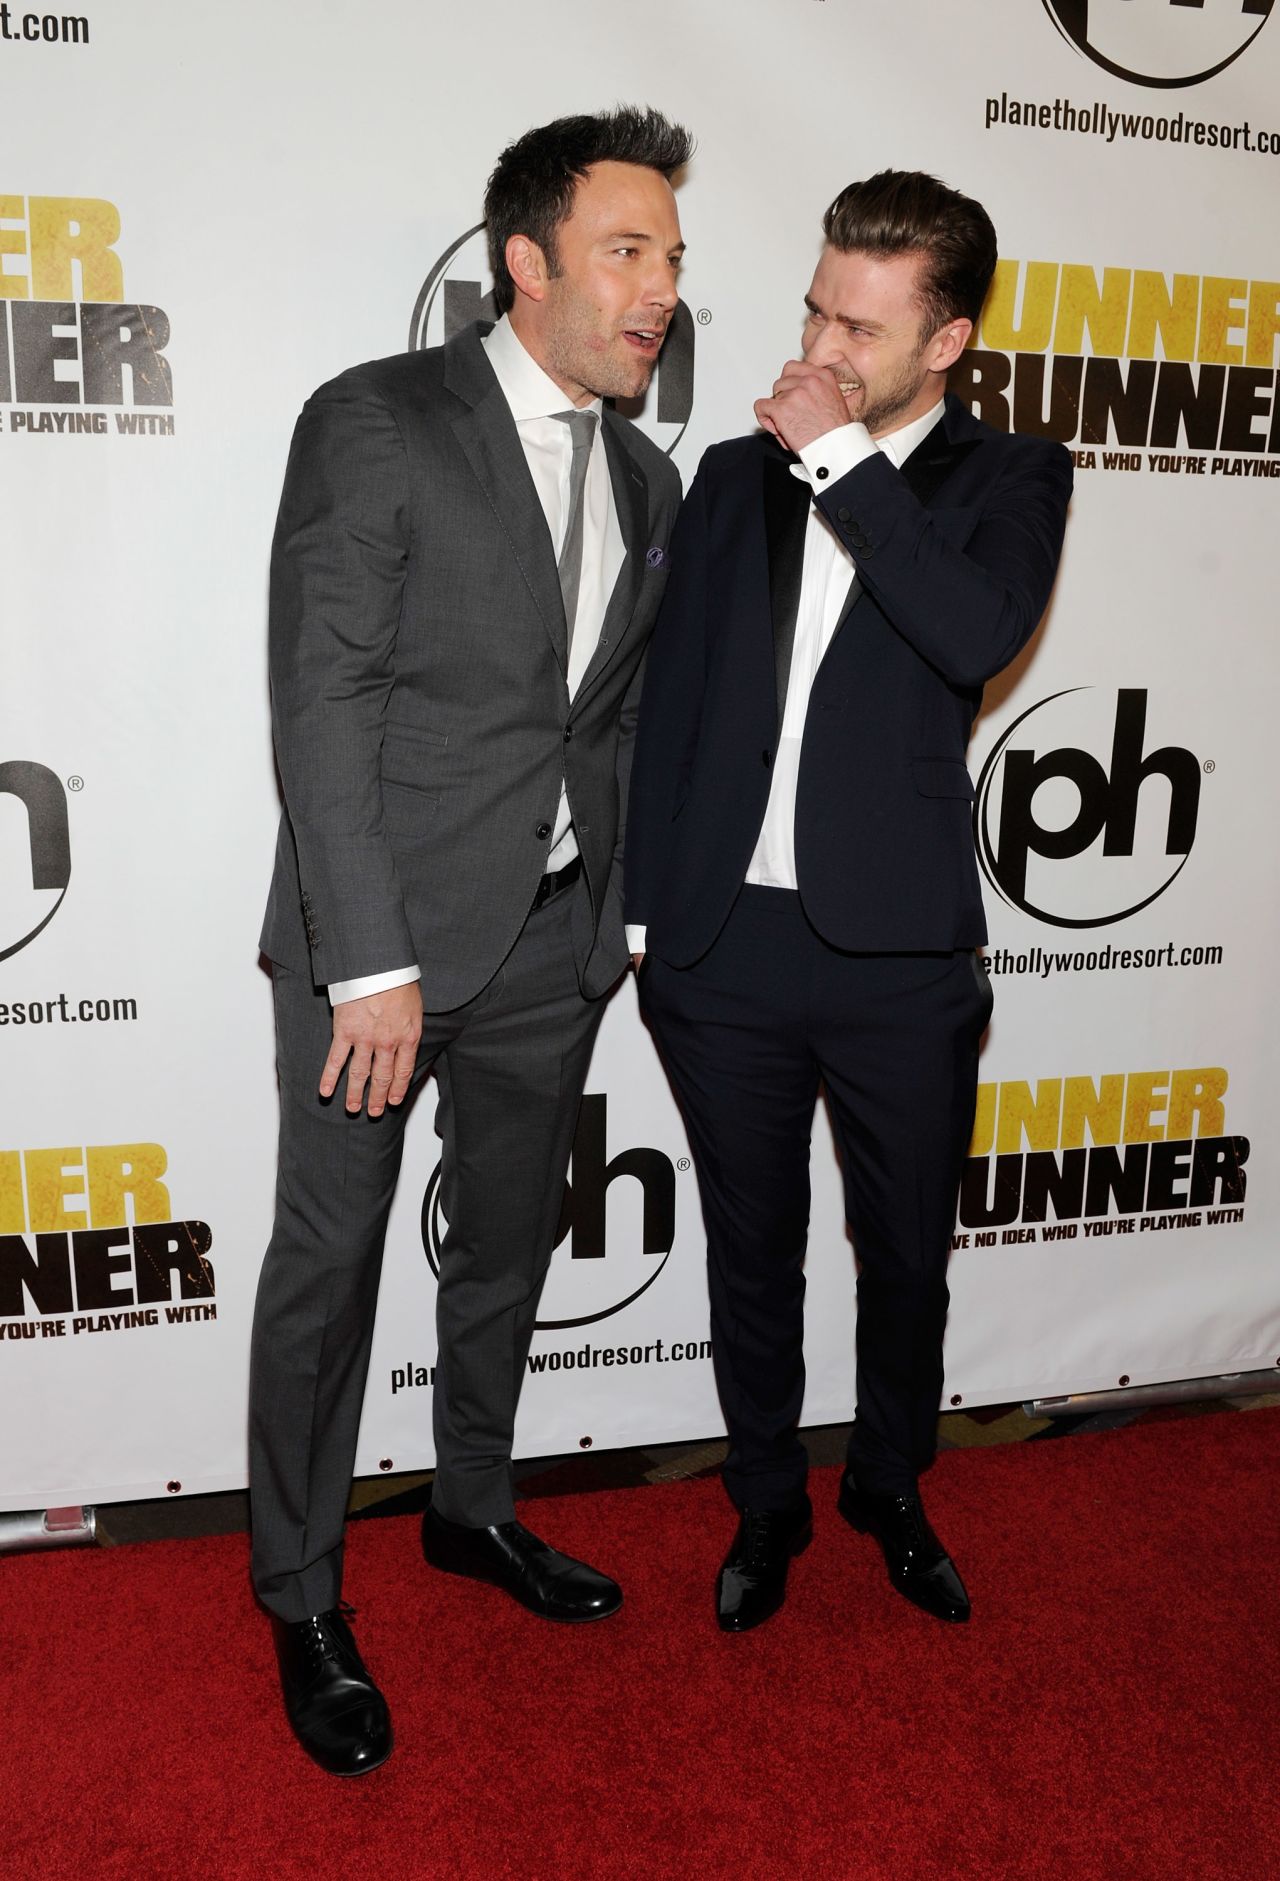 "Runner Runner" co-stars Ben Affleck and Justin Timberlake share a laugh at the premiere of their movie on September 18.